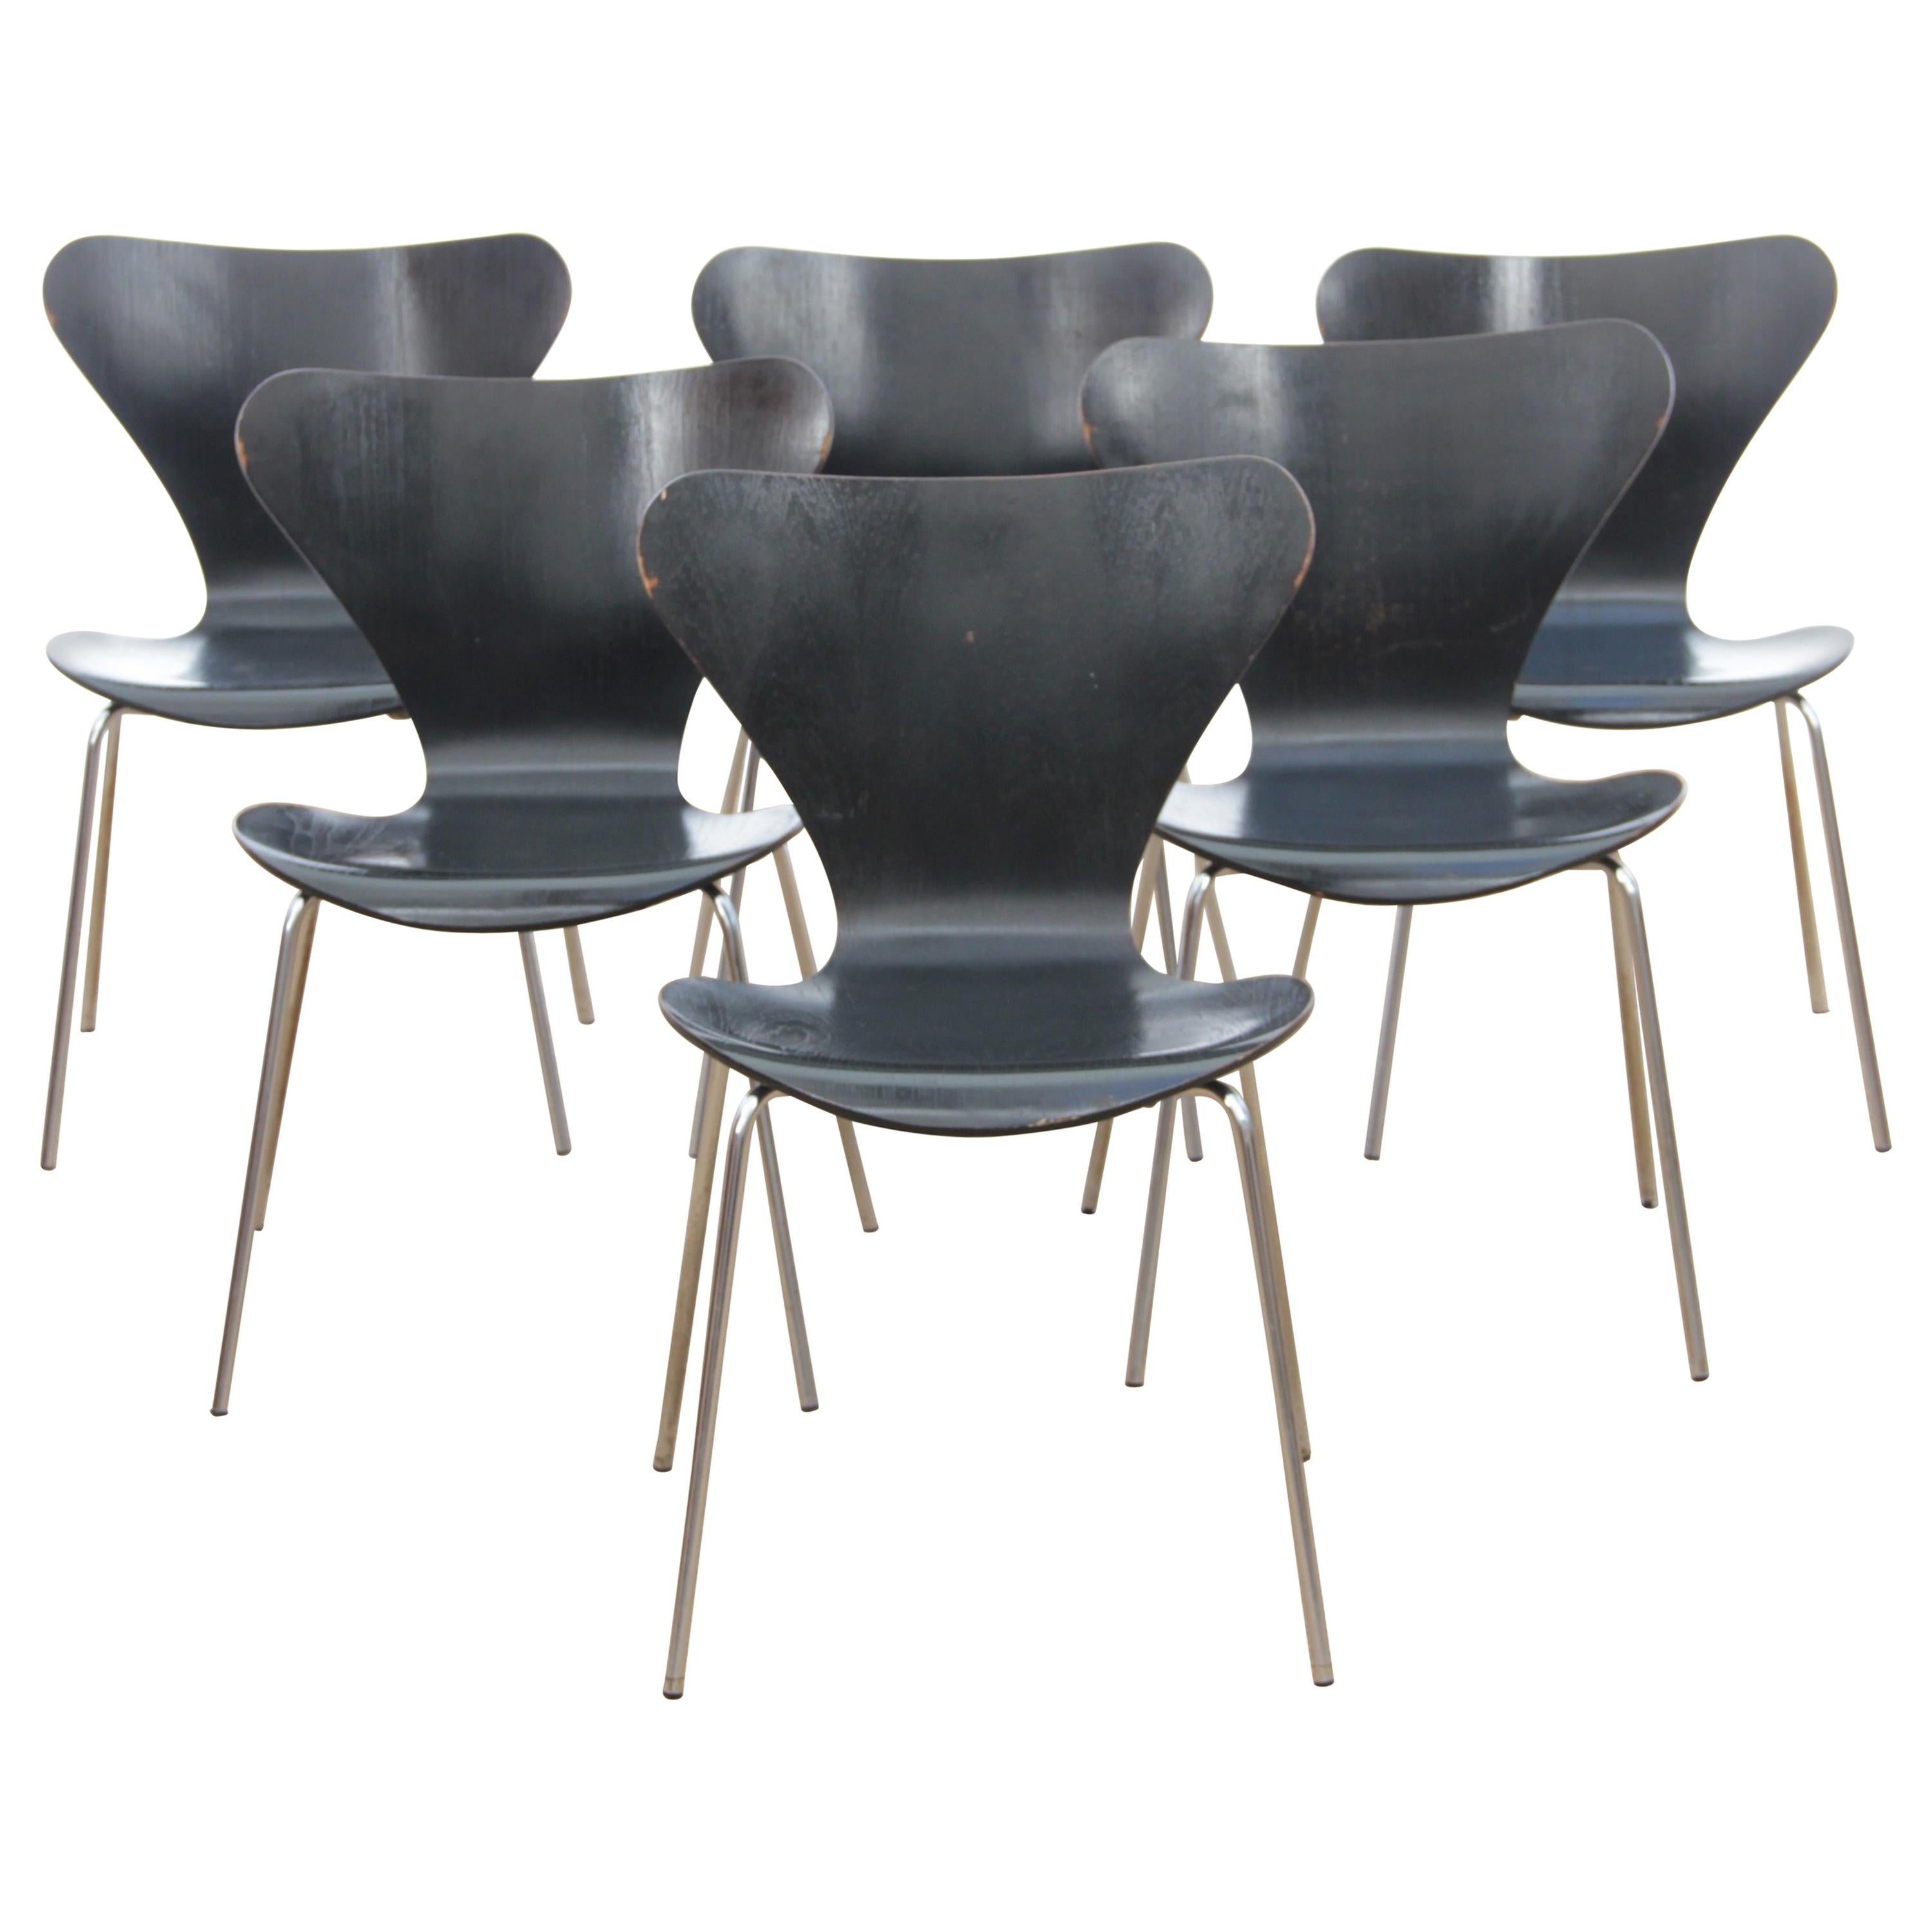 Mid-Century Modern Scandinavian Set of 6 Chairs by Arne Jacobsen For Sale